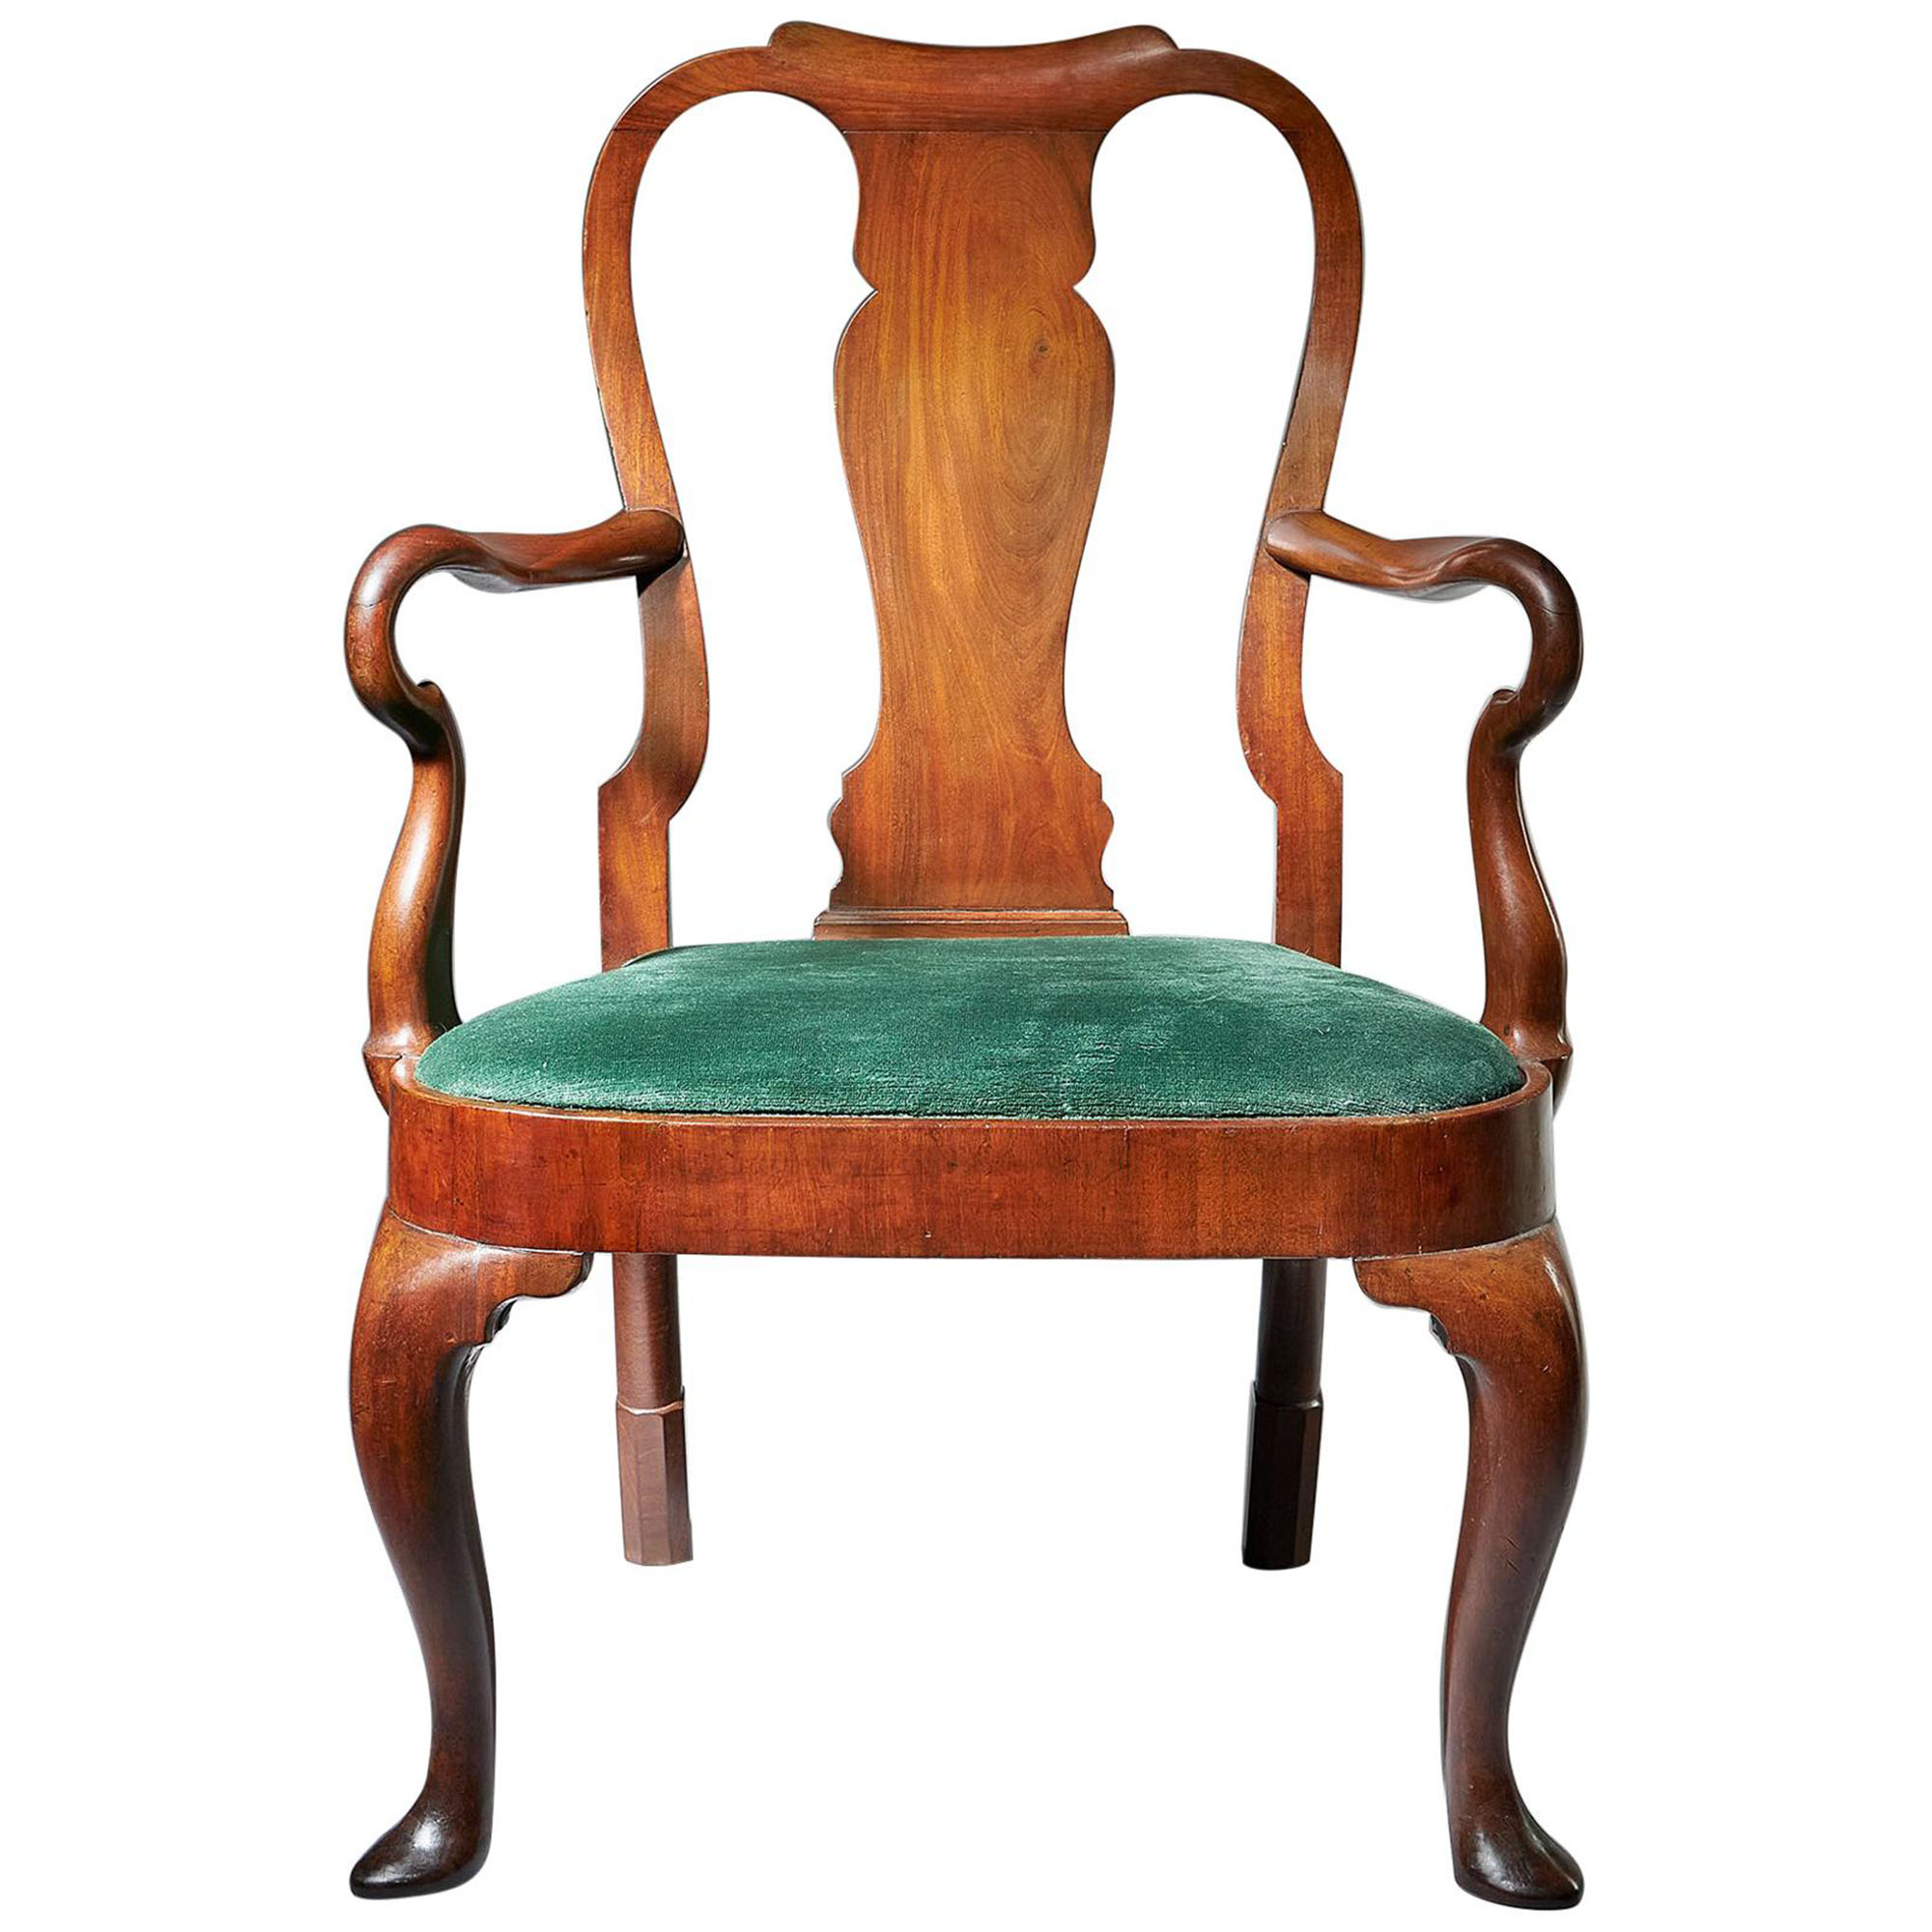 Rare 18th Century George II Mahogany Armchair with Carved Shepherds Crook Arms 3